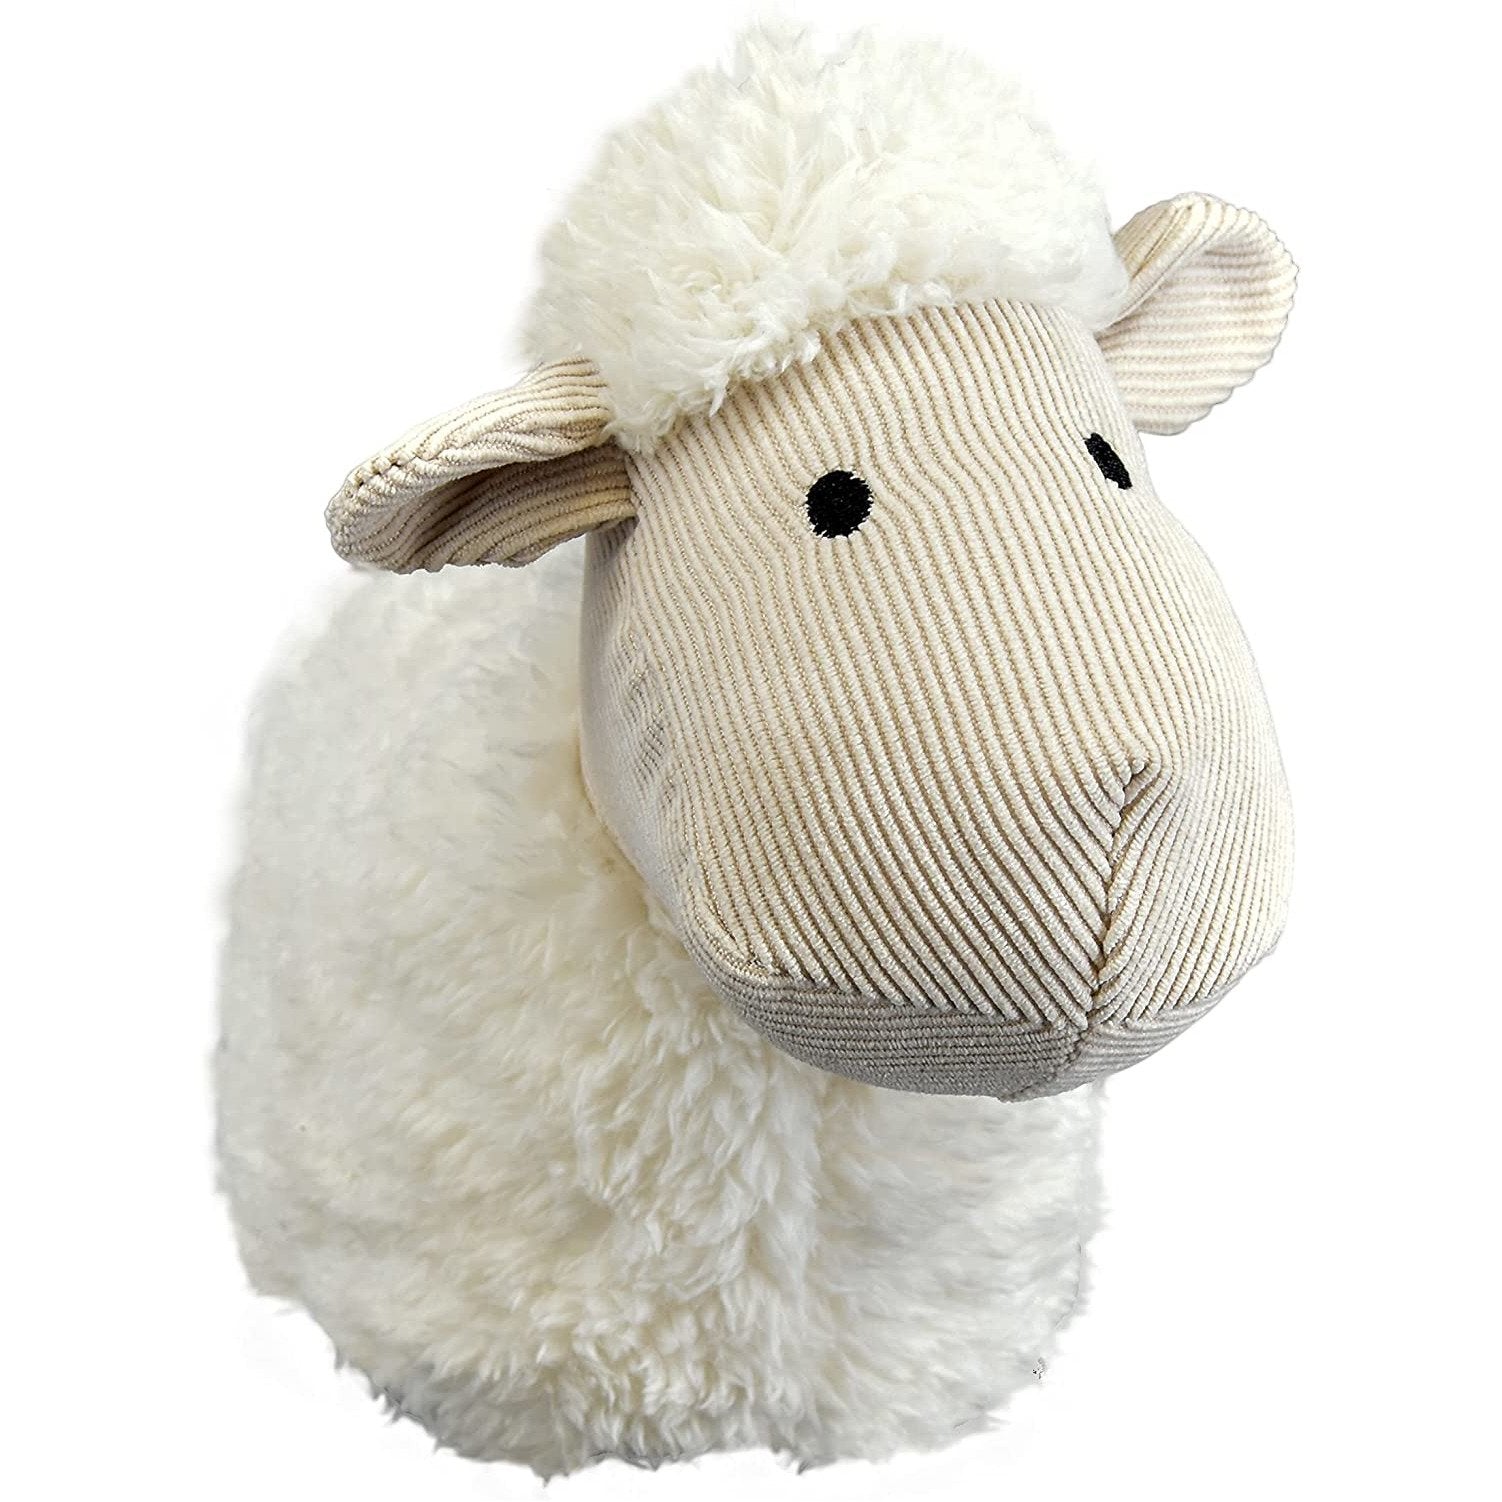 Soft Fluffy Novelty Animal Door Stops GEEZY - The Magic Toy Shop